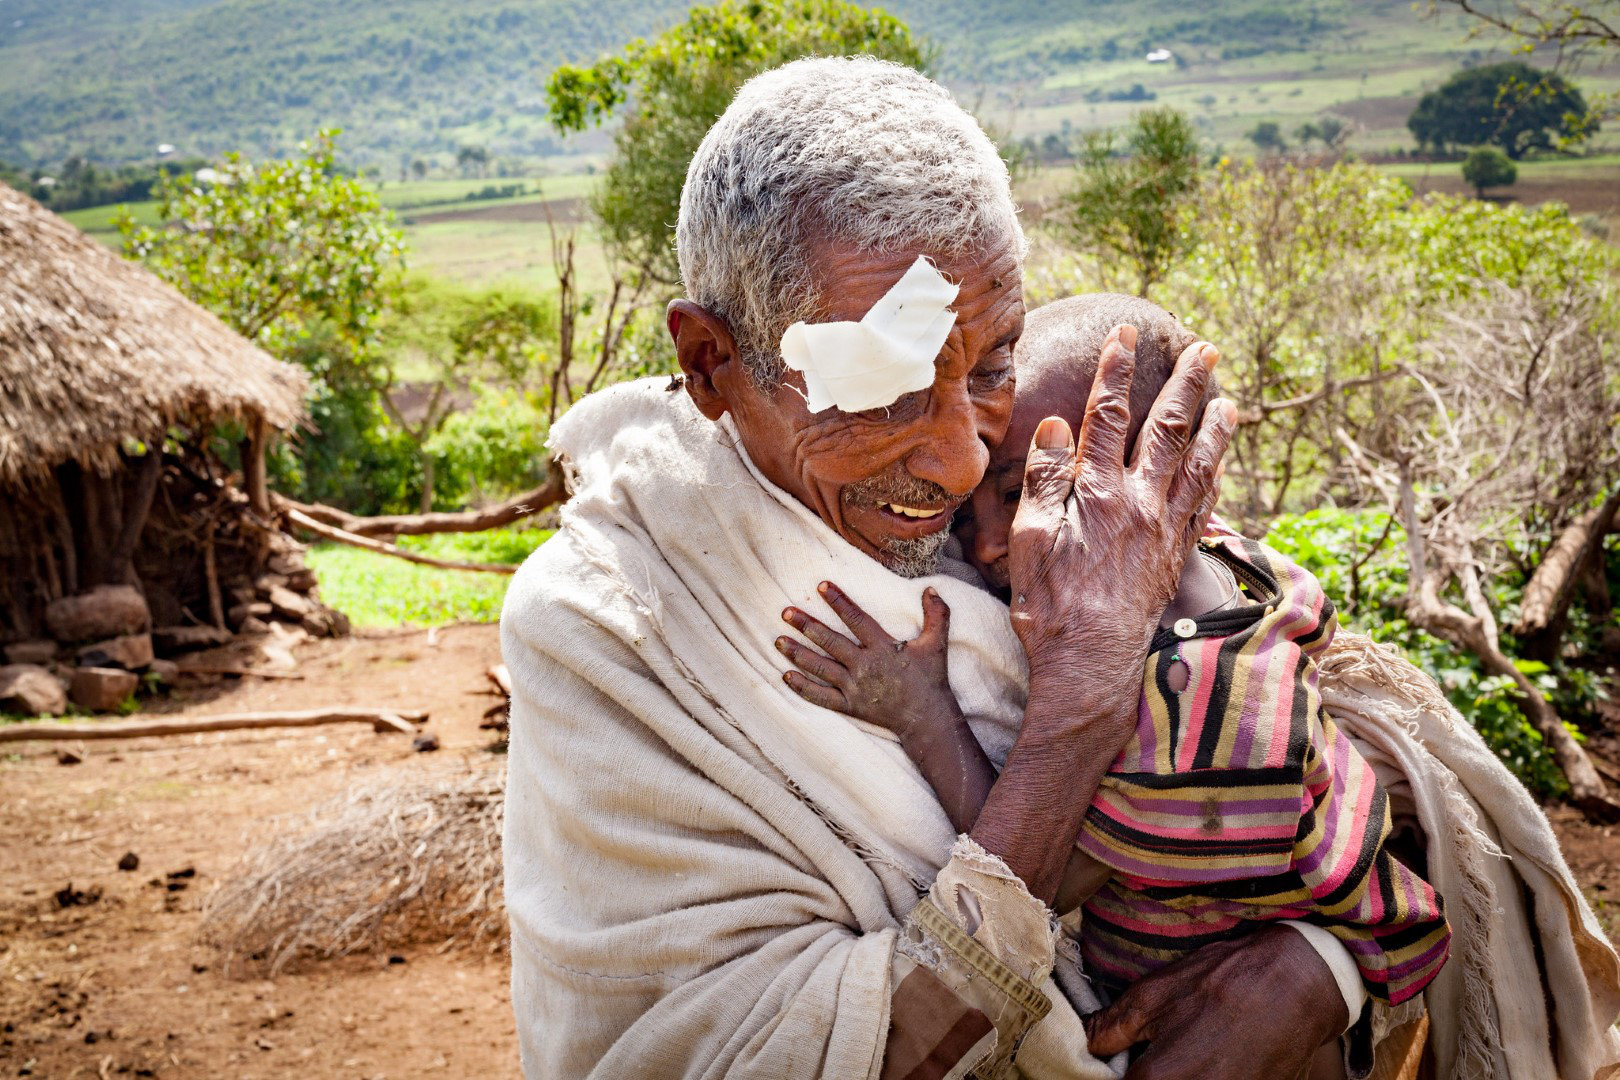 In their village in rural Burkina Fast, a grandfather and grandson embrace. The grandfather can see his grandchild clearly for the first time after his successful cataract surgery.